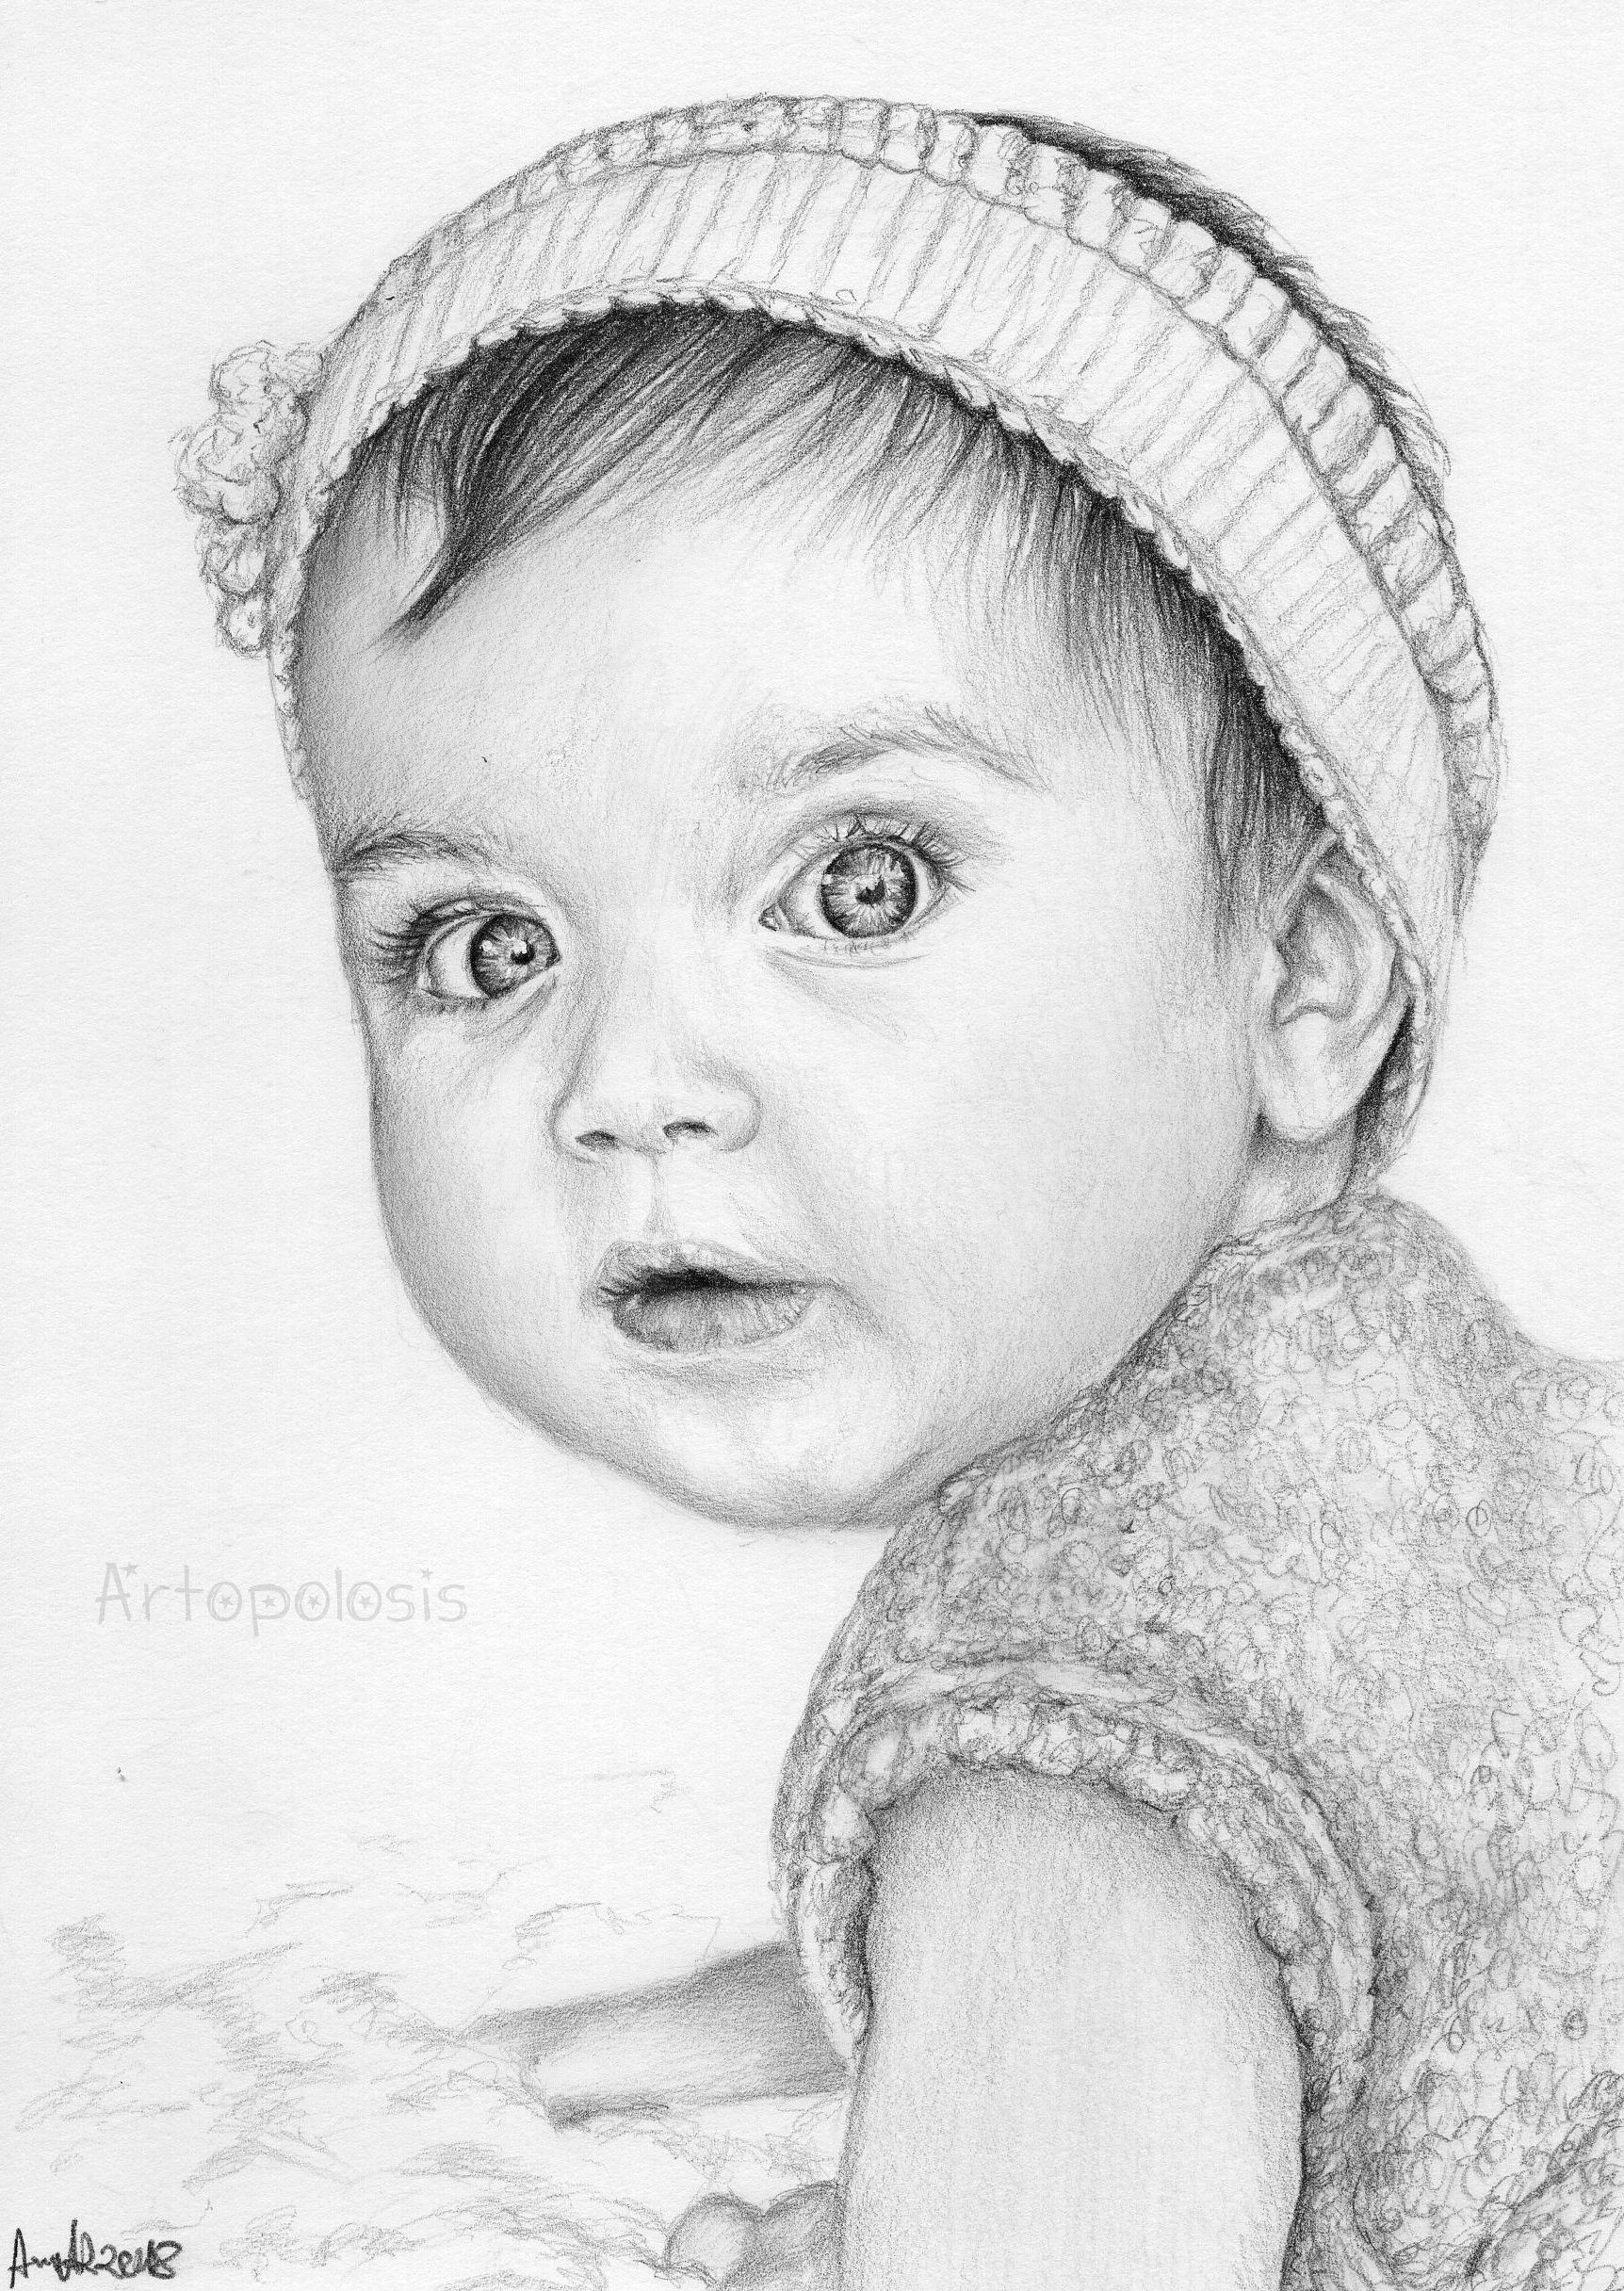 Little Baby Girl Drawing Kid Baby Girl Child Drawing Art Realism Cute Pretty